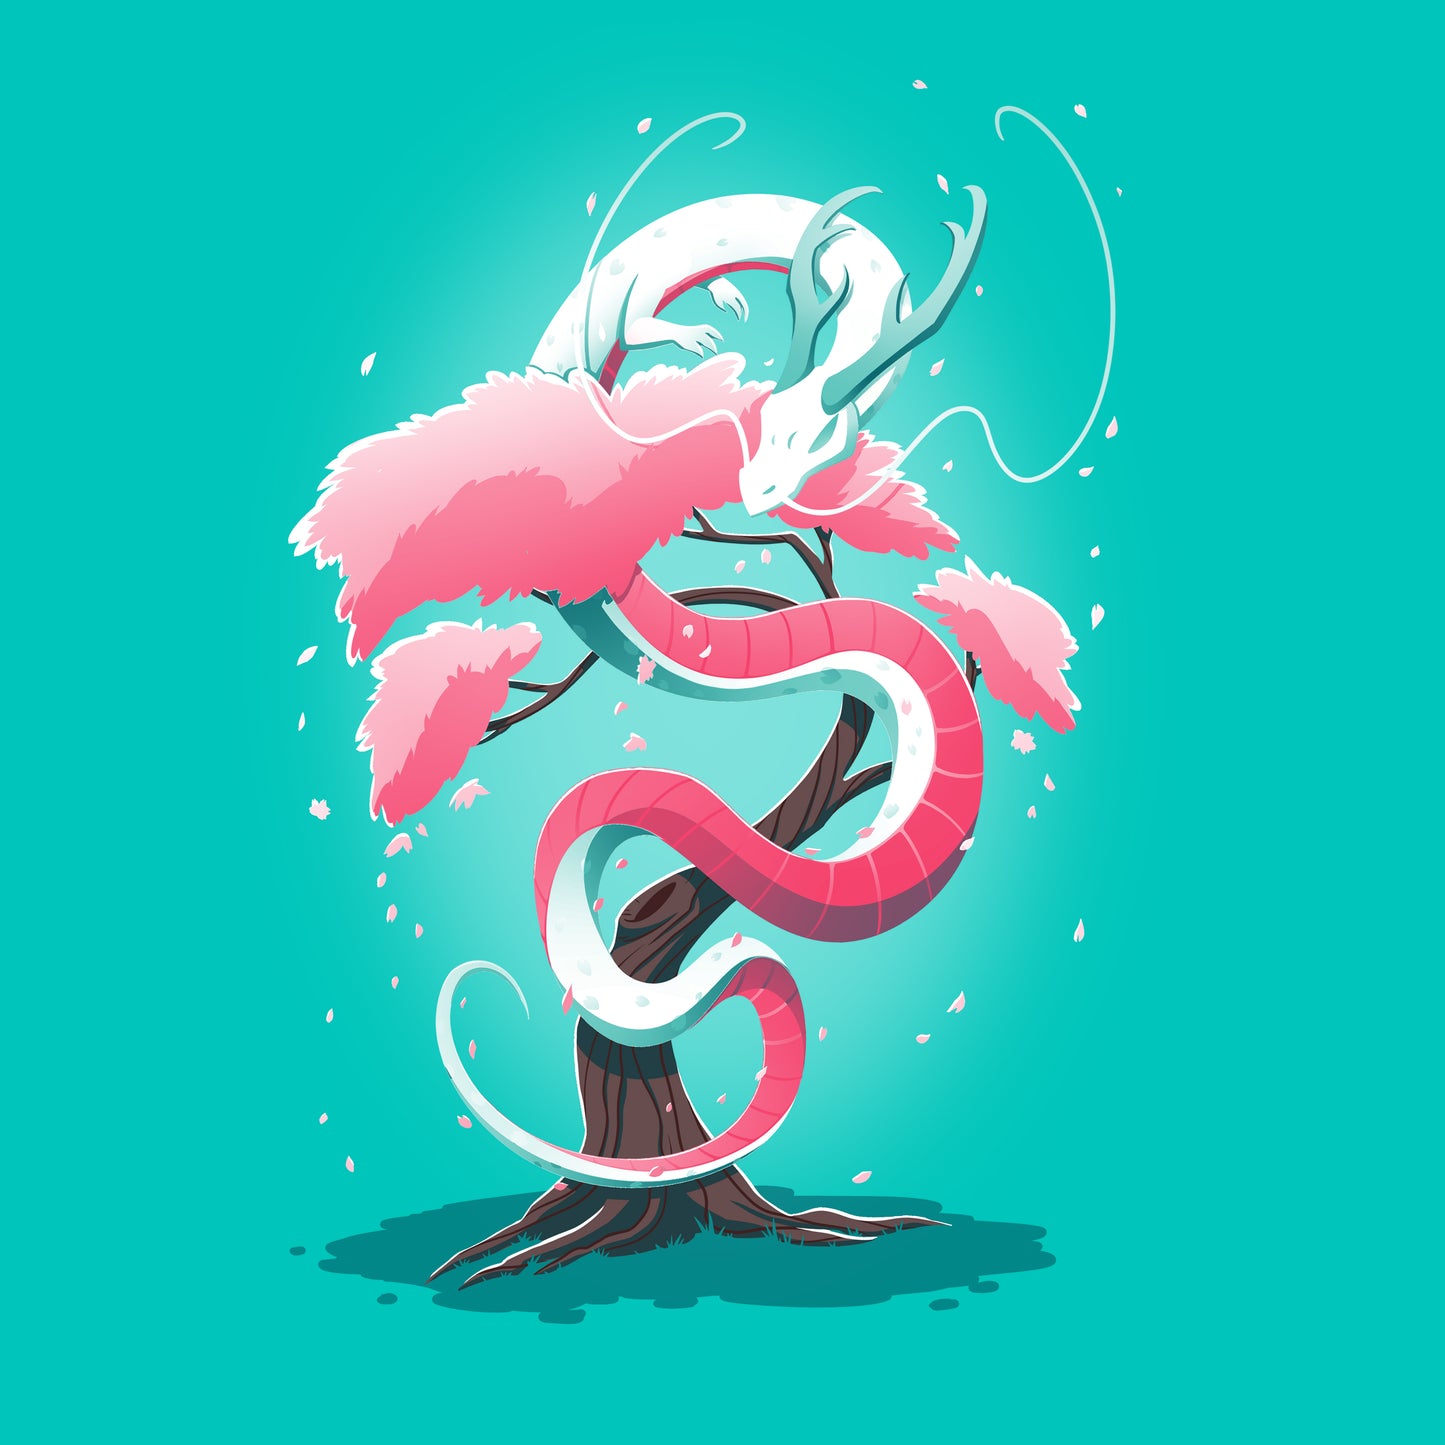 Illustration of a Cherry Blossom Dragon, its white and pink scales coiled around a flowering cherry blossom tree, against a rich, teal background. Perfect for a monsterdigital Caribbean Blue T-shirt made from super soft ringspun cotton.